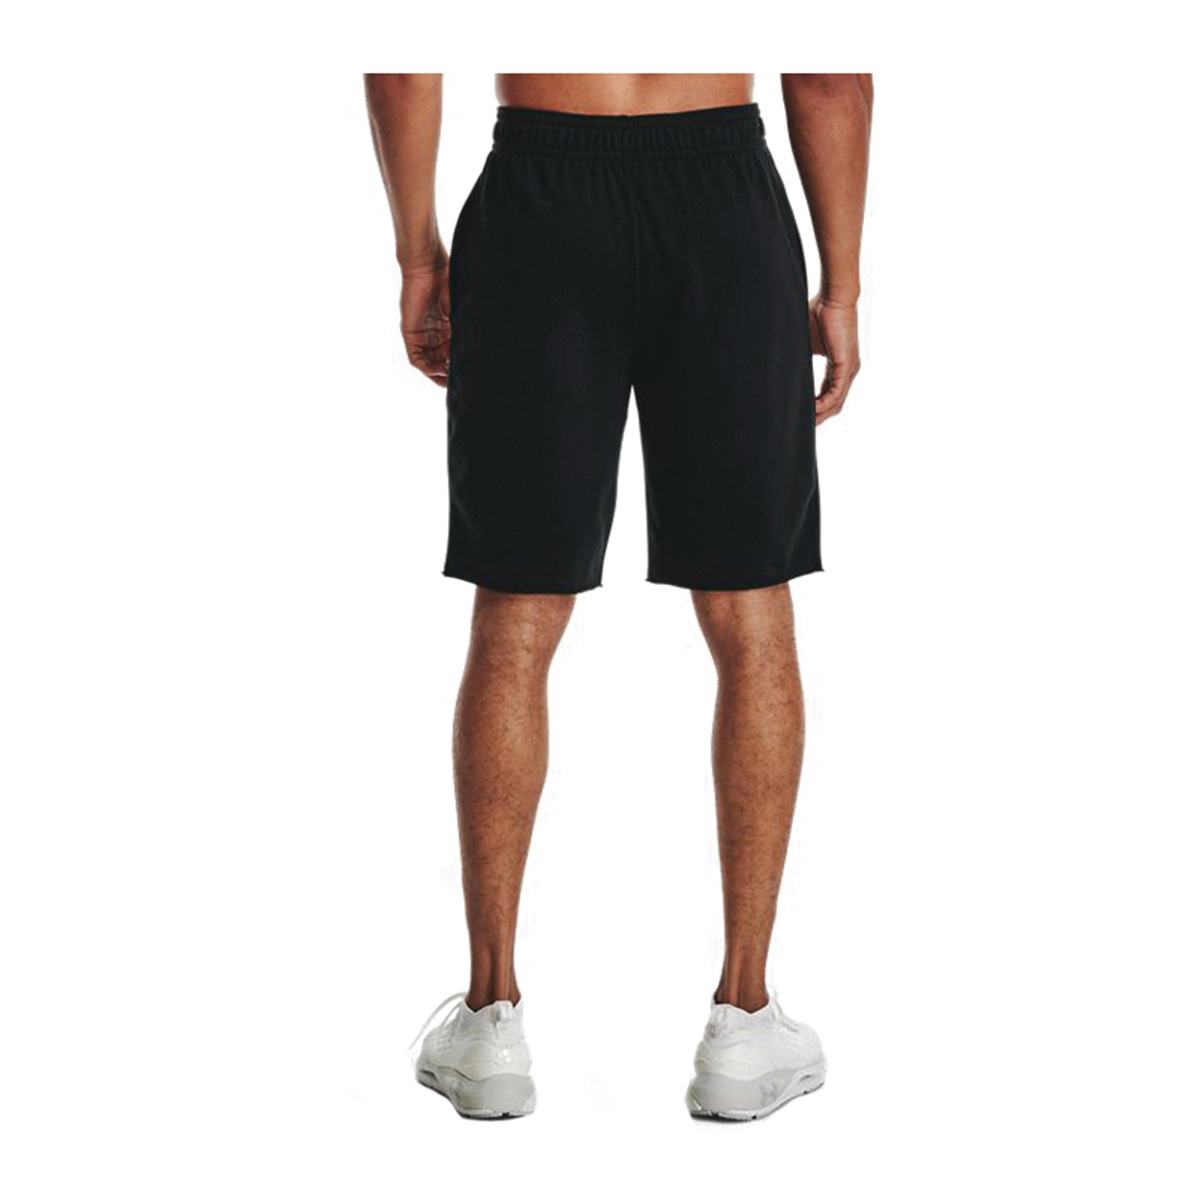 Under Armour Rival Terry Series 1361631-001-XL Shorts, XL, Cotton/Polyester, Black/Onyx White, Streamlined, Regular - 2